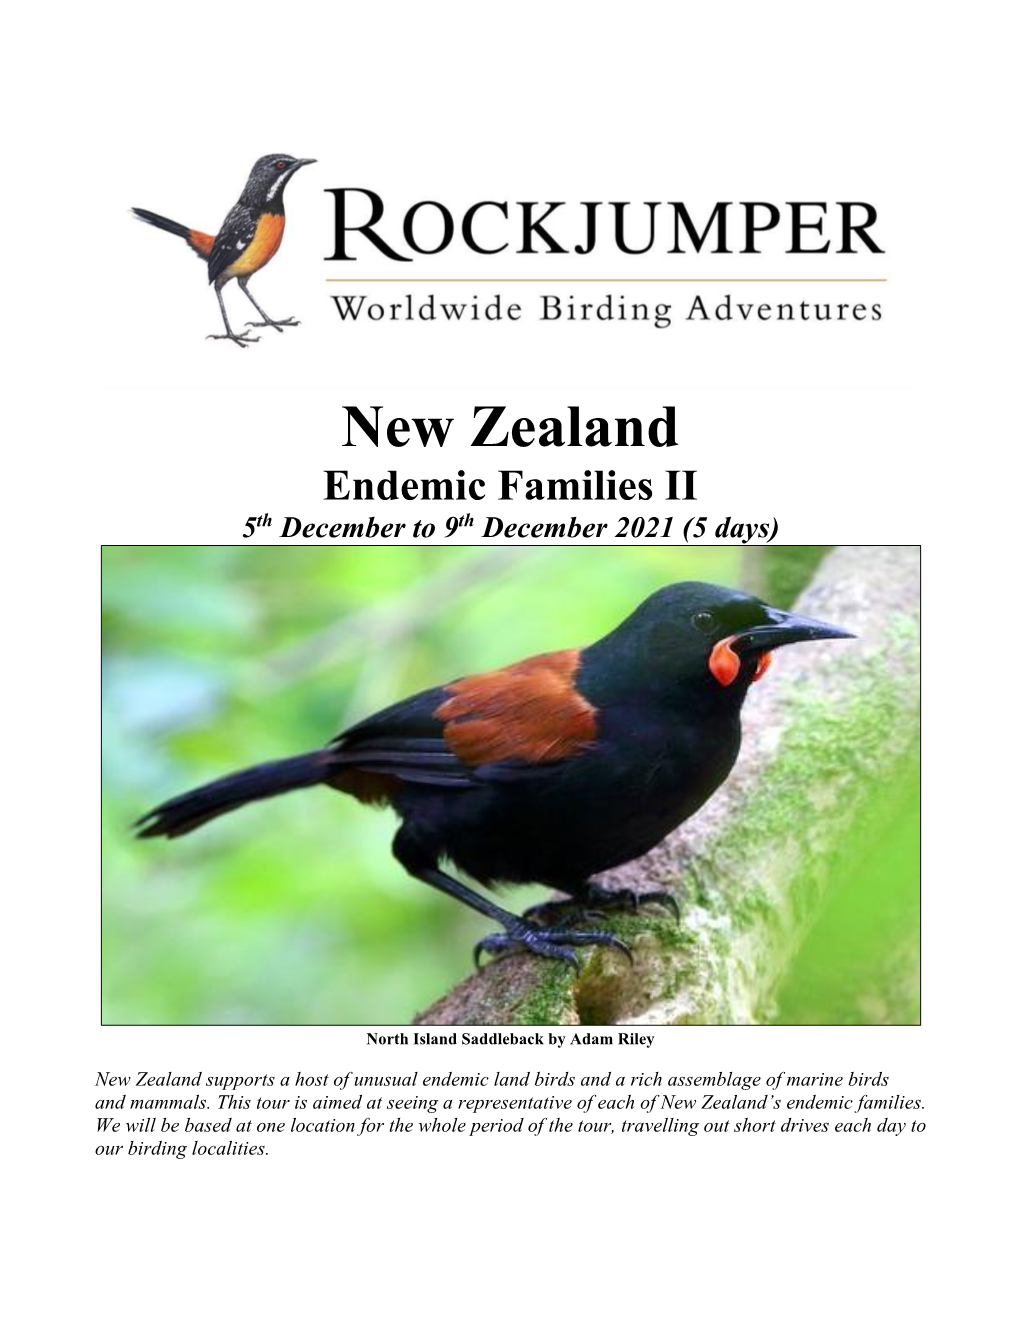 New Zealand Endemic Families II 5Th December to 9Th December 2021 (5 Days)